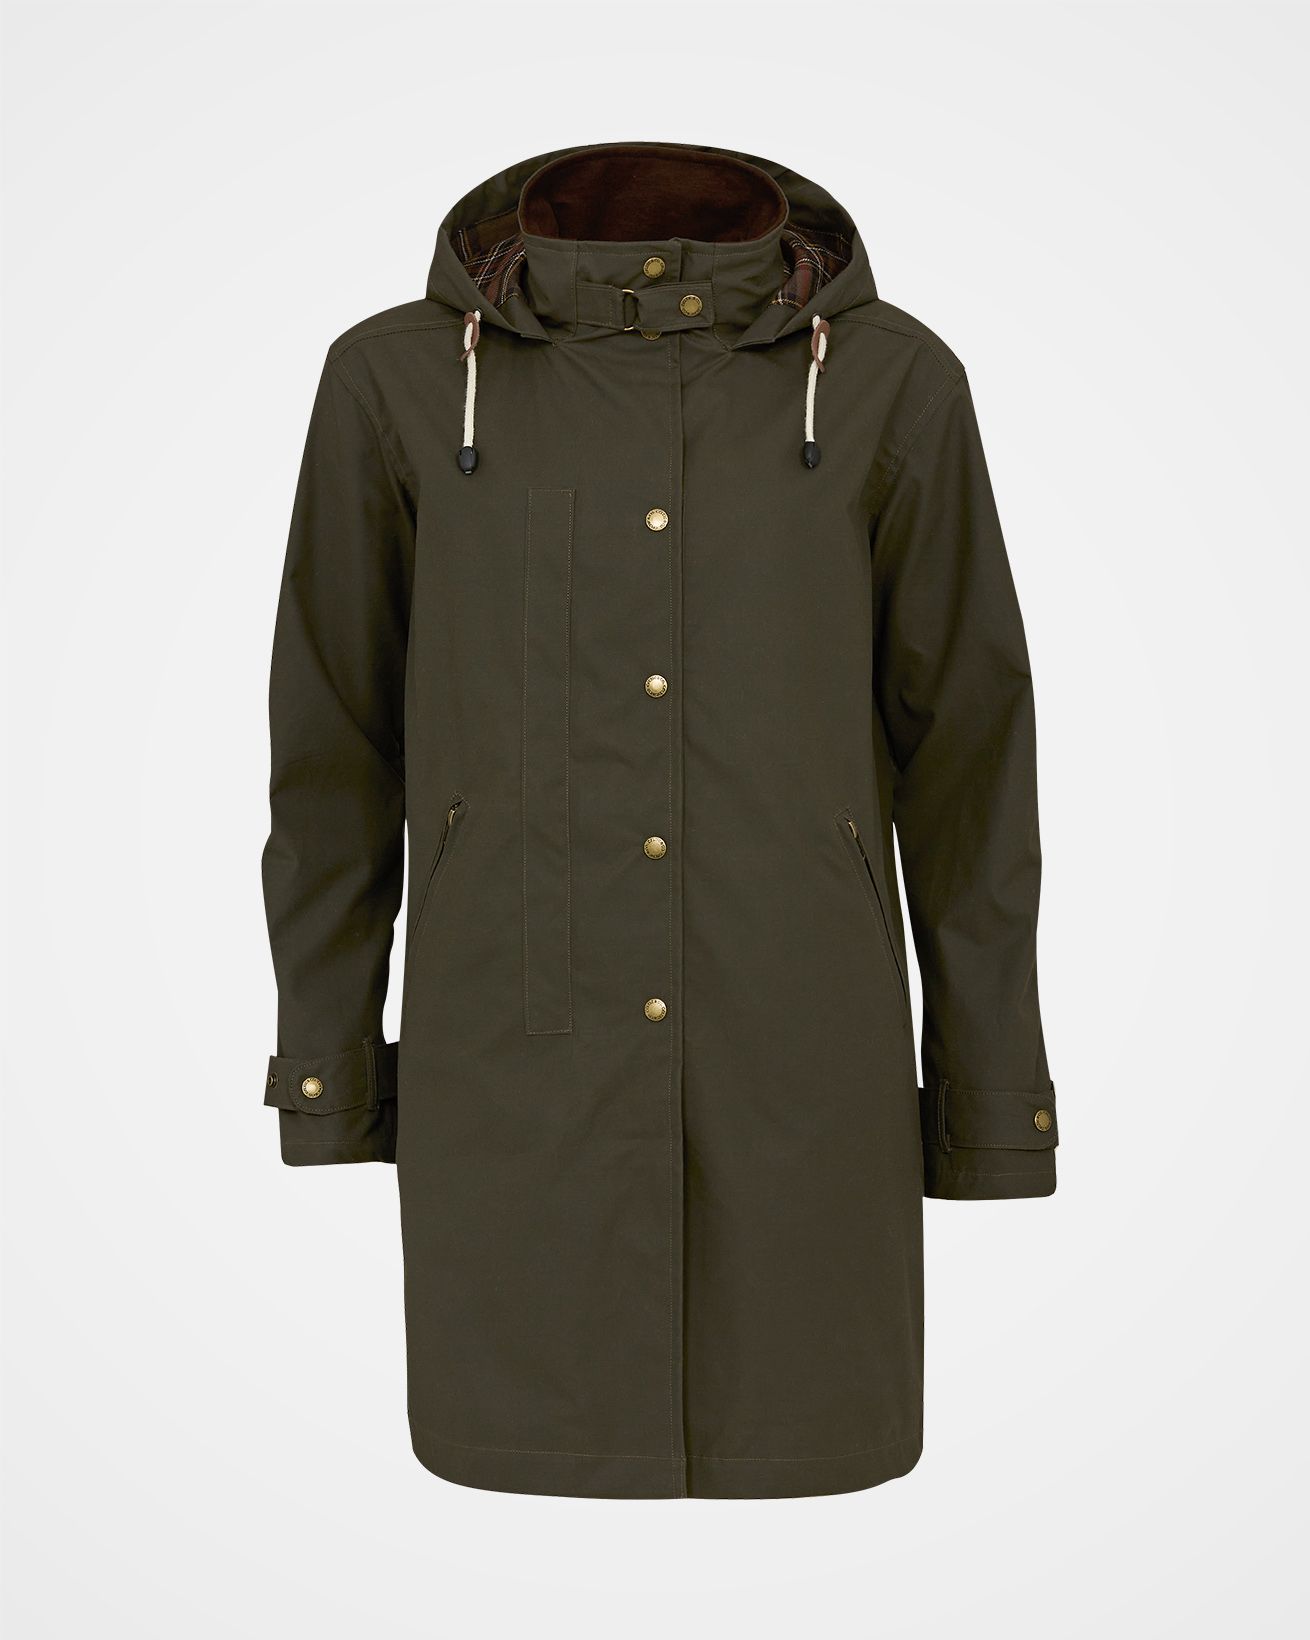 Easy Care Waxed Cotton Parka / Olive / 10